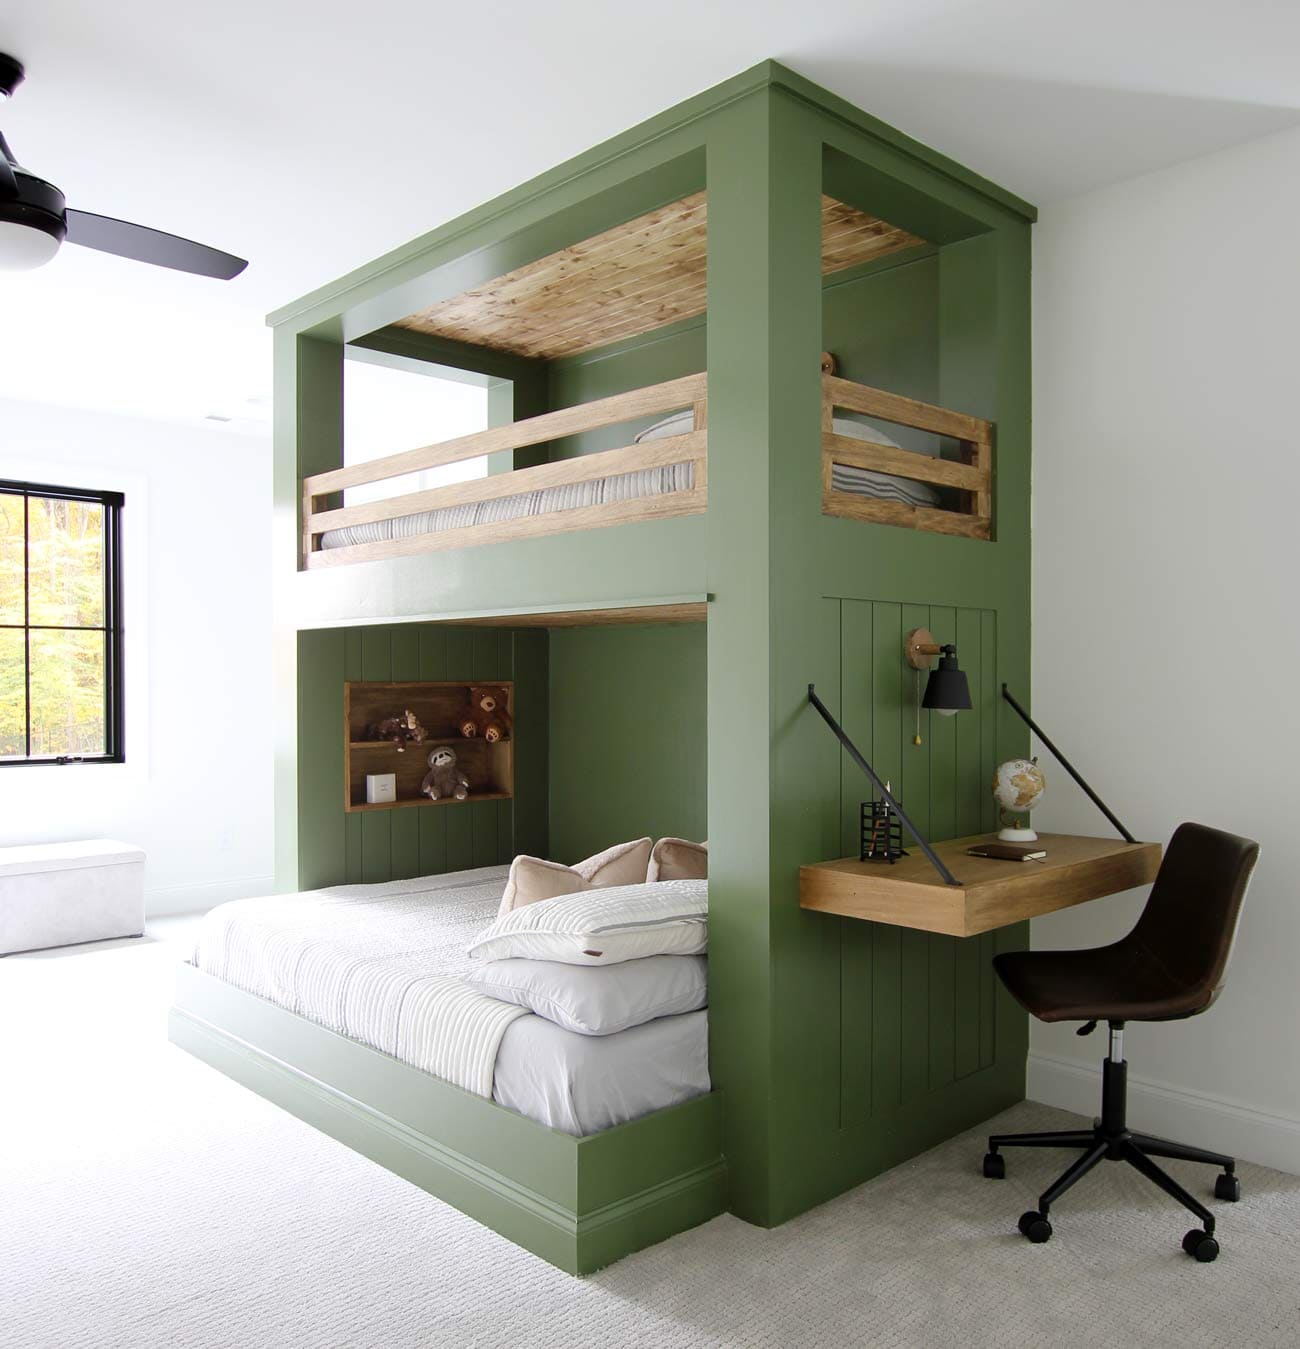 25 fantastic built-in bed ideas for children's rooms - 85